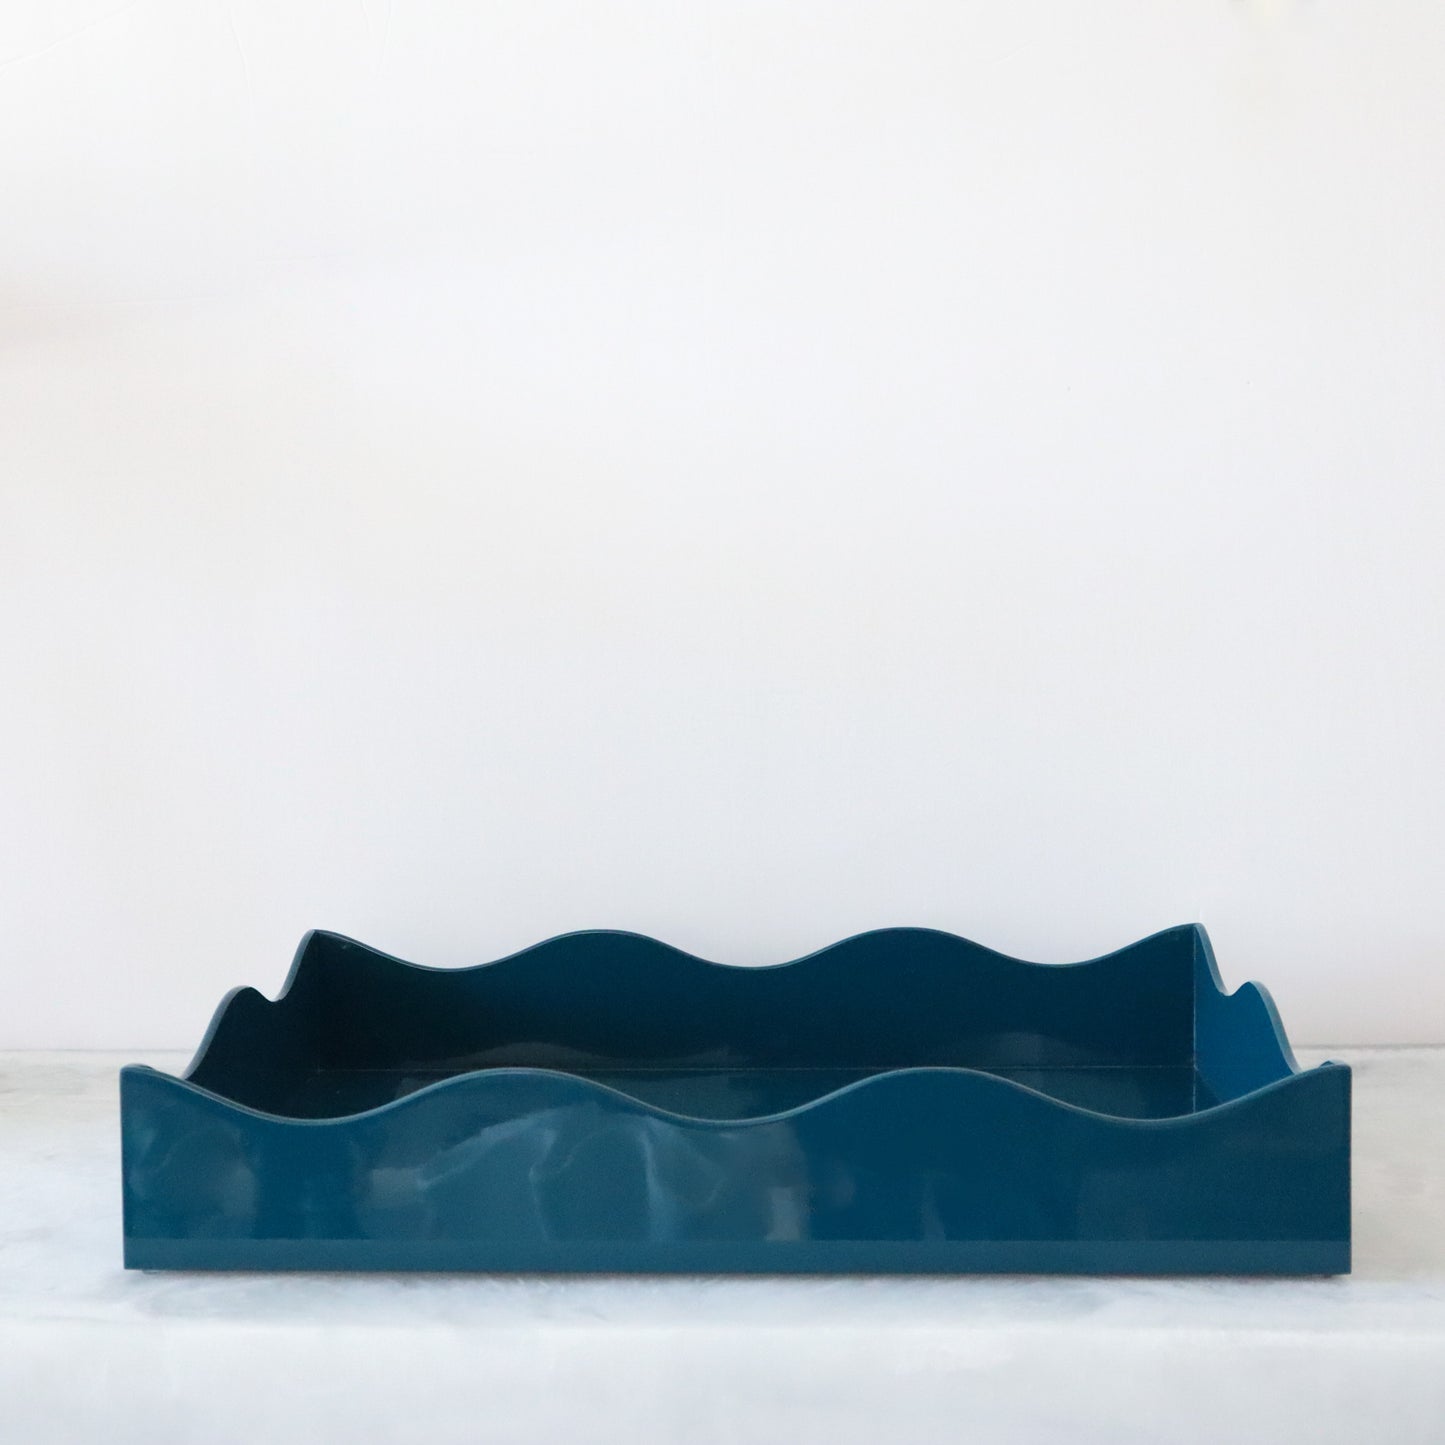 Large Belles Rives Lacquer Tray - Marine Blue